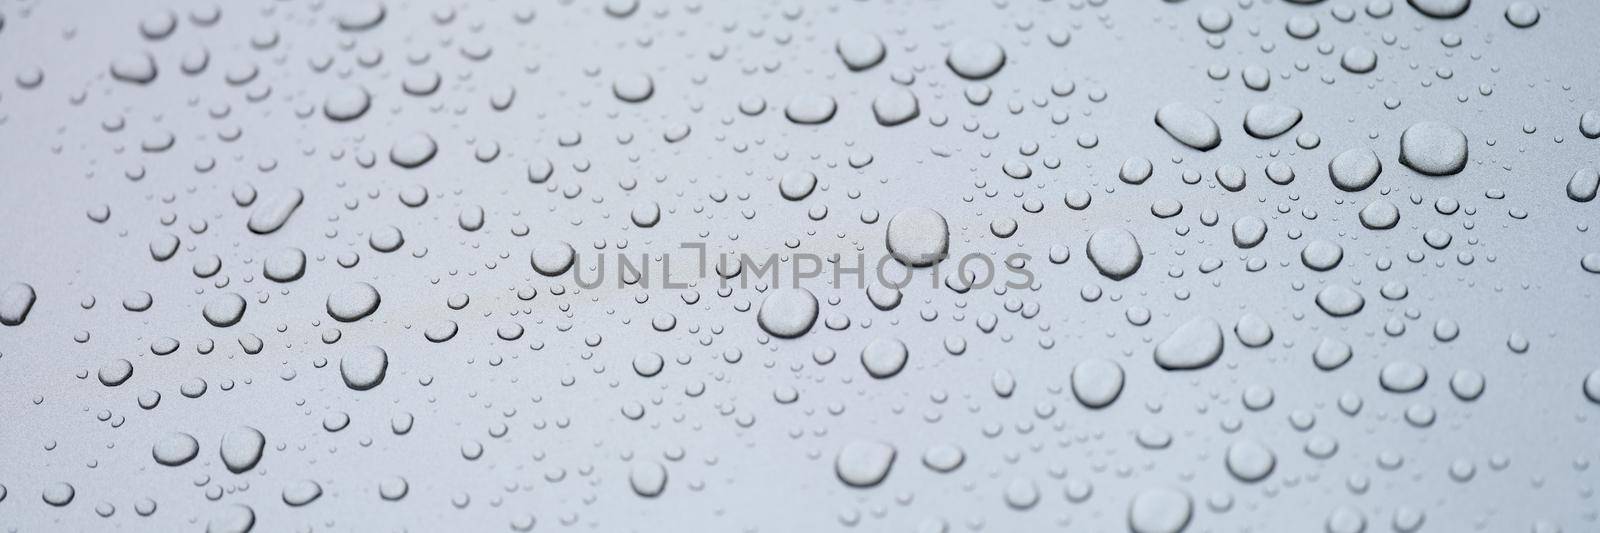 Water drops on glass, gray background, close-up by kuprevich